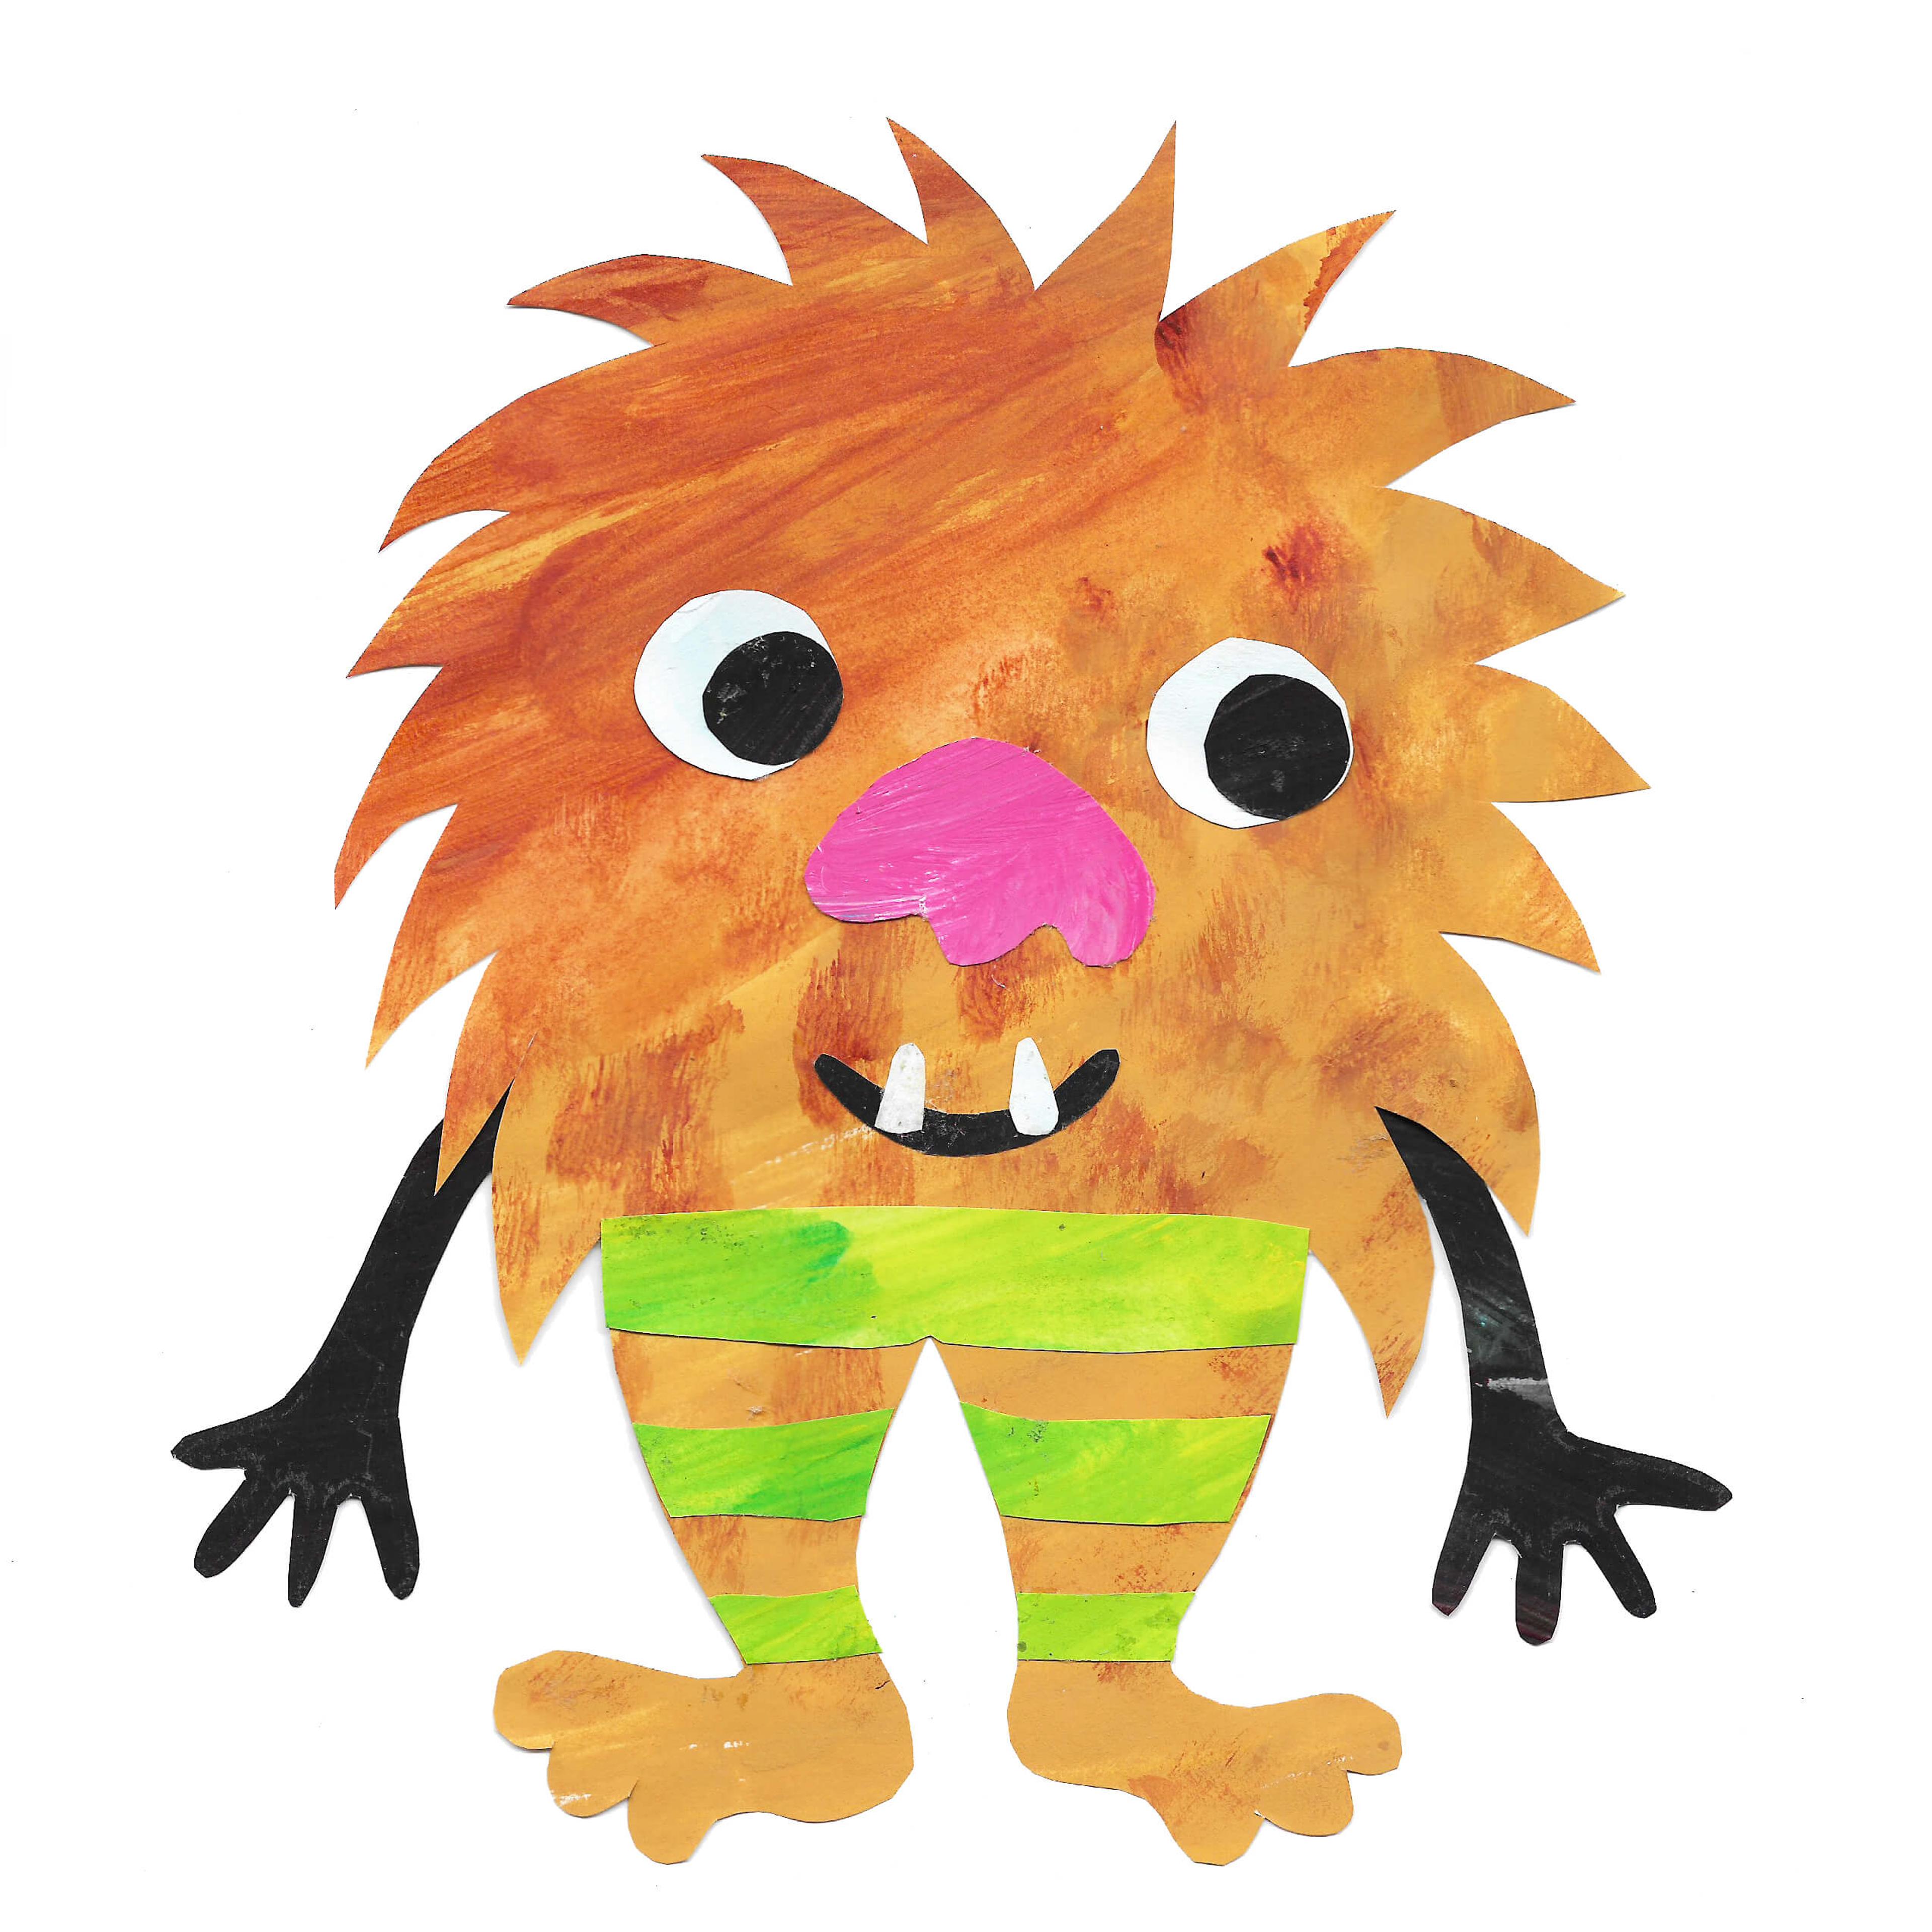 A brown furry little creature with a smiling face and striped legs, created using textured collage paper.